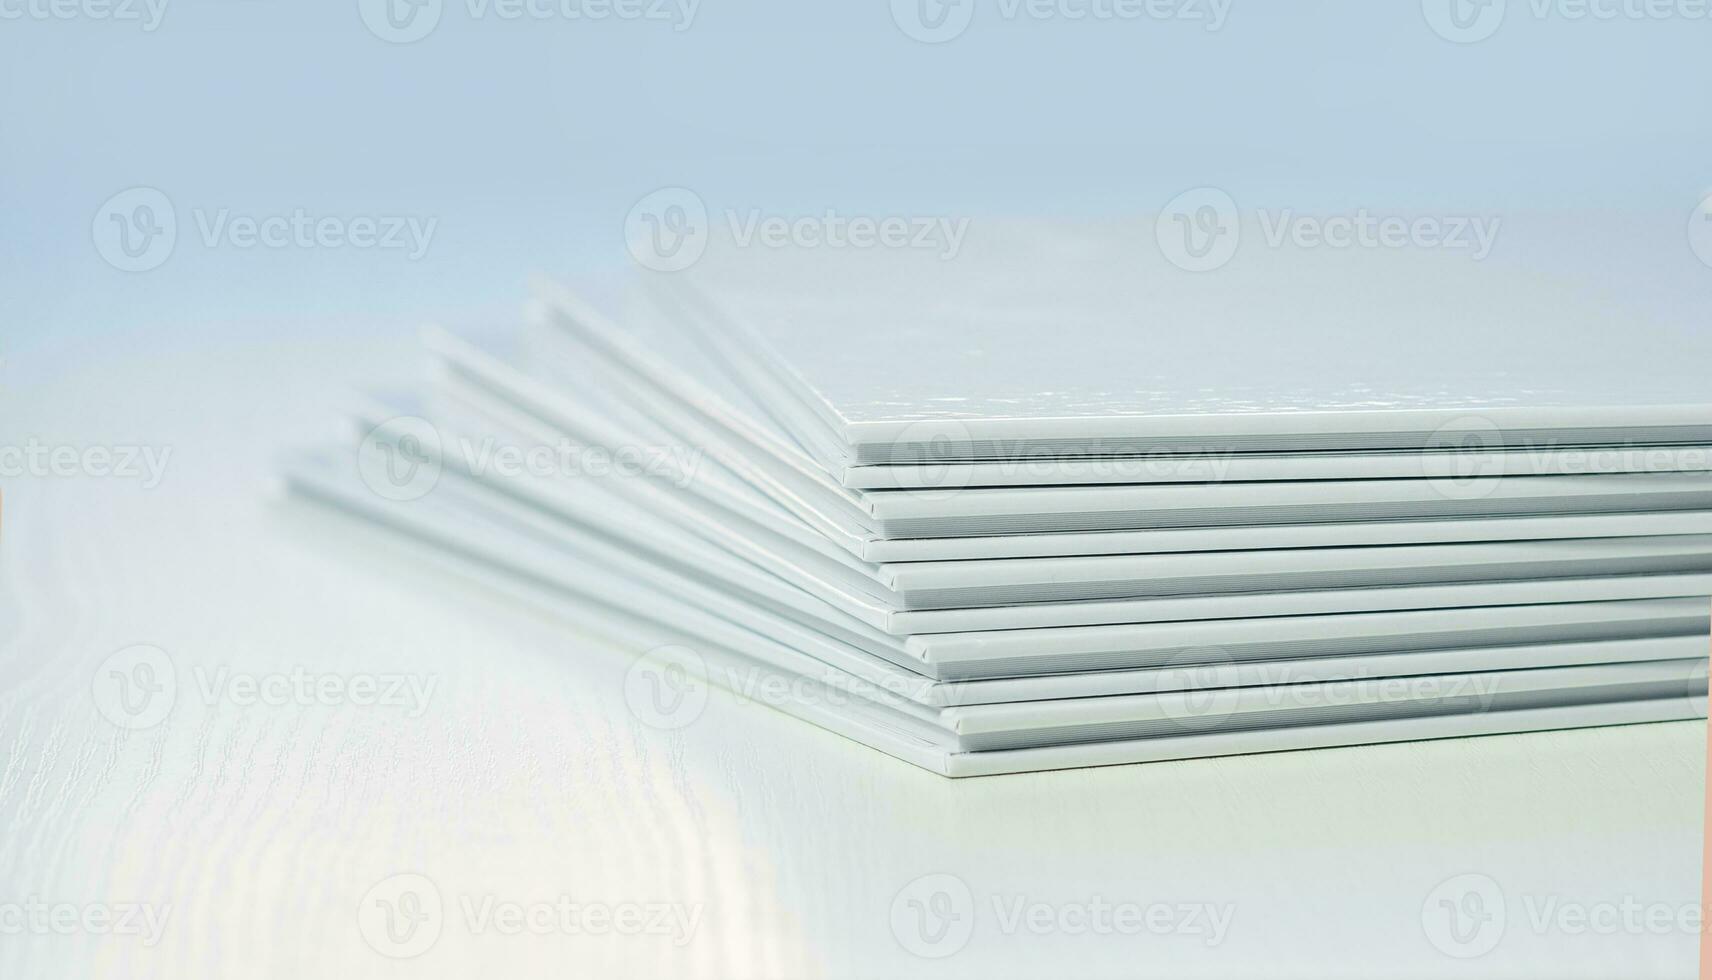 covers of photo books with clean empty white covers, close-up, partial blur